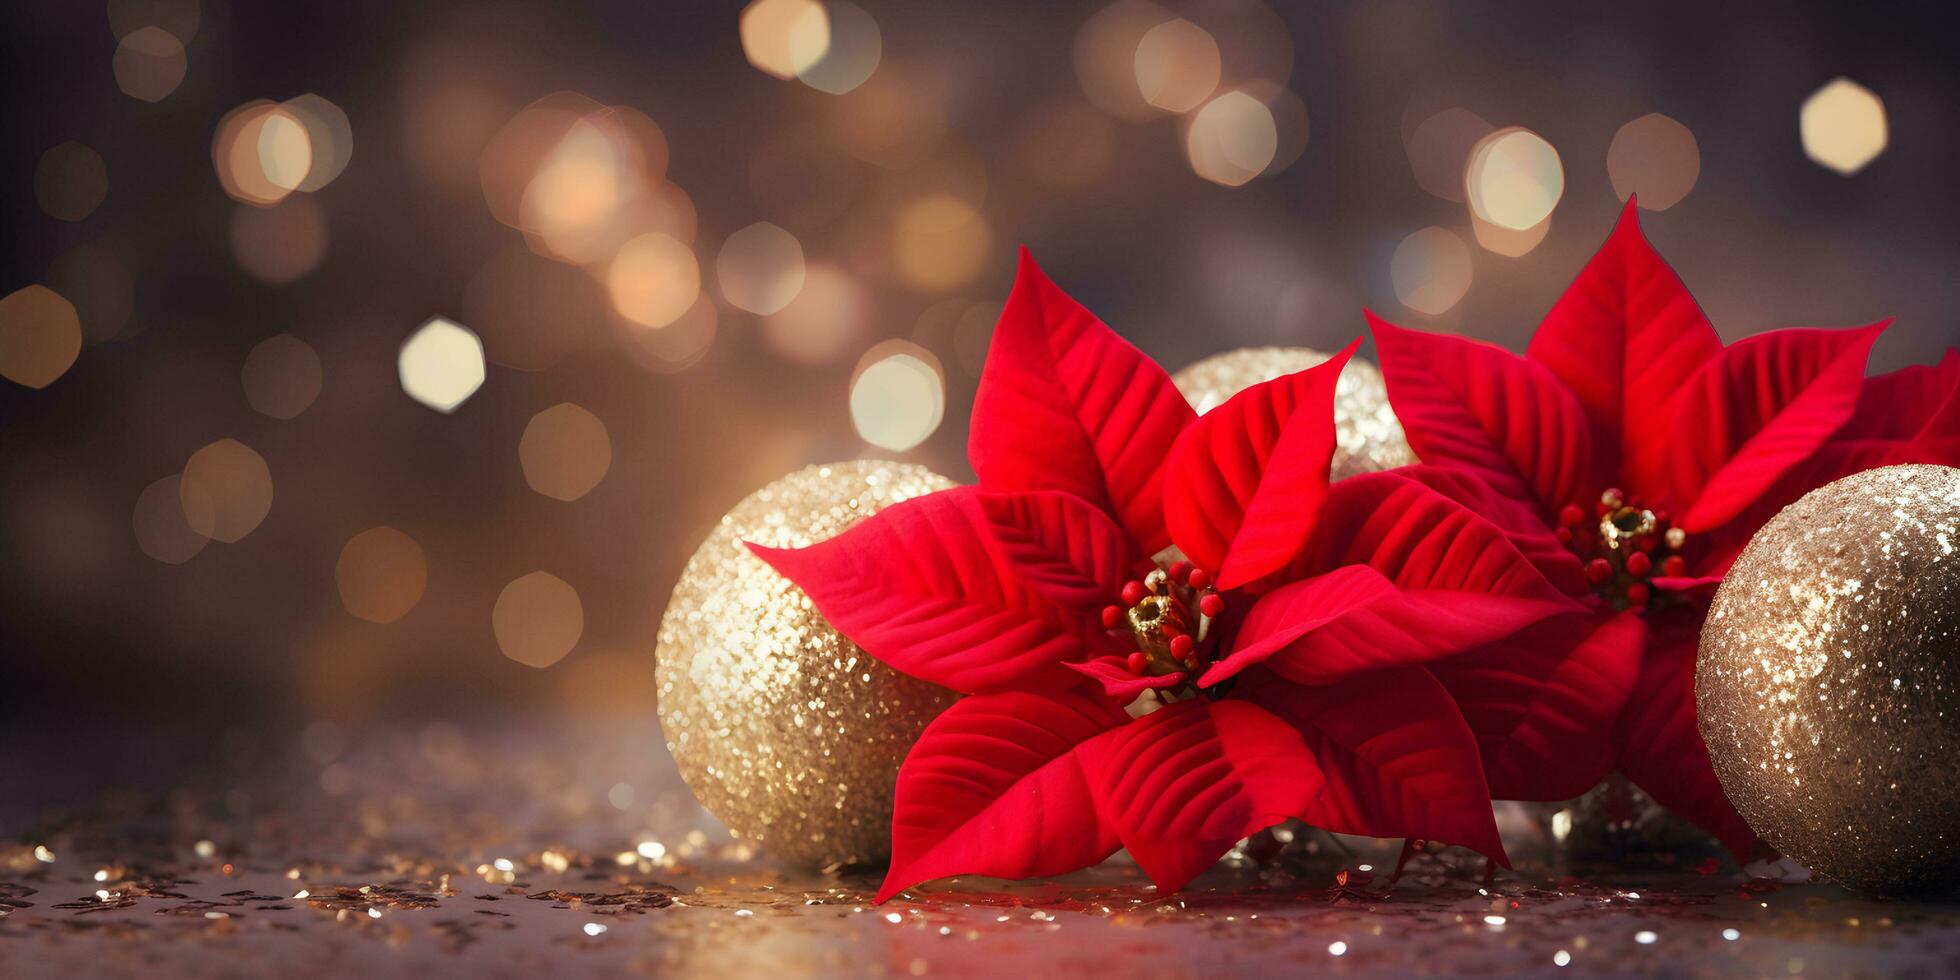 Christmas poinsettia flowers decoration with christmas ornaments balls over sparkling background. Festive banner composition with copy space. photo